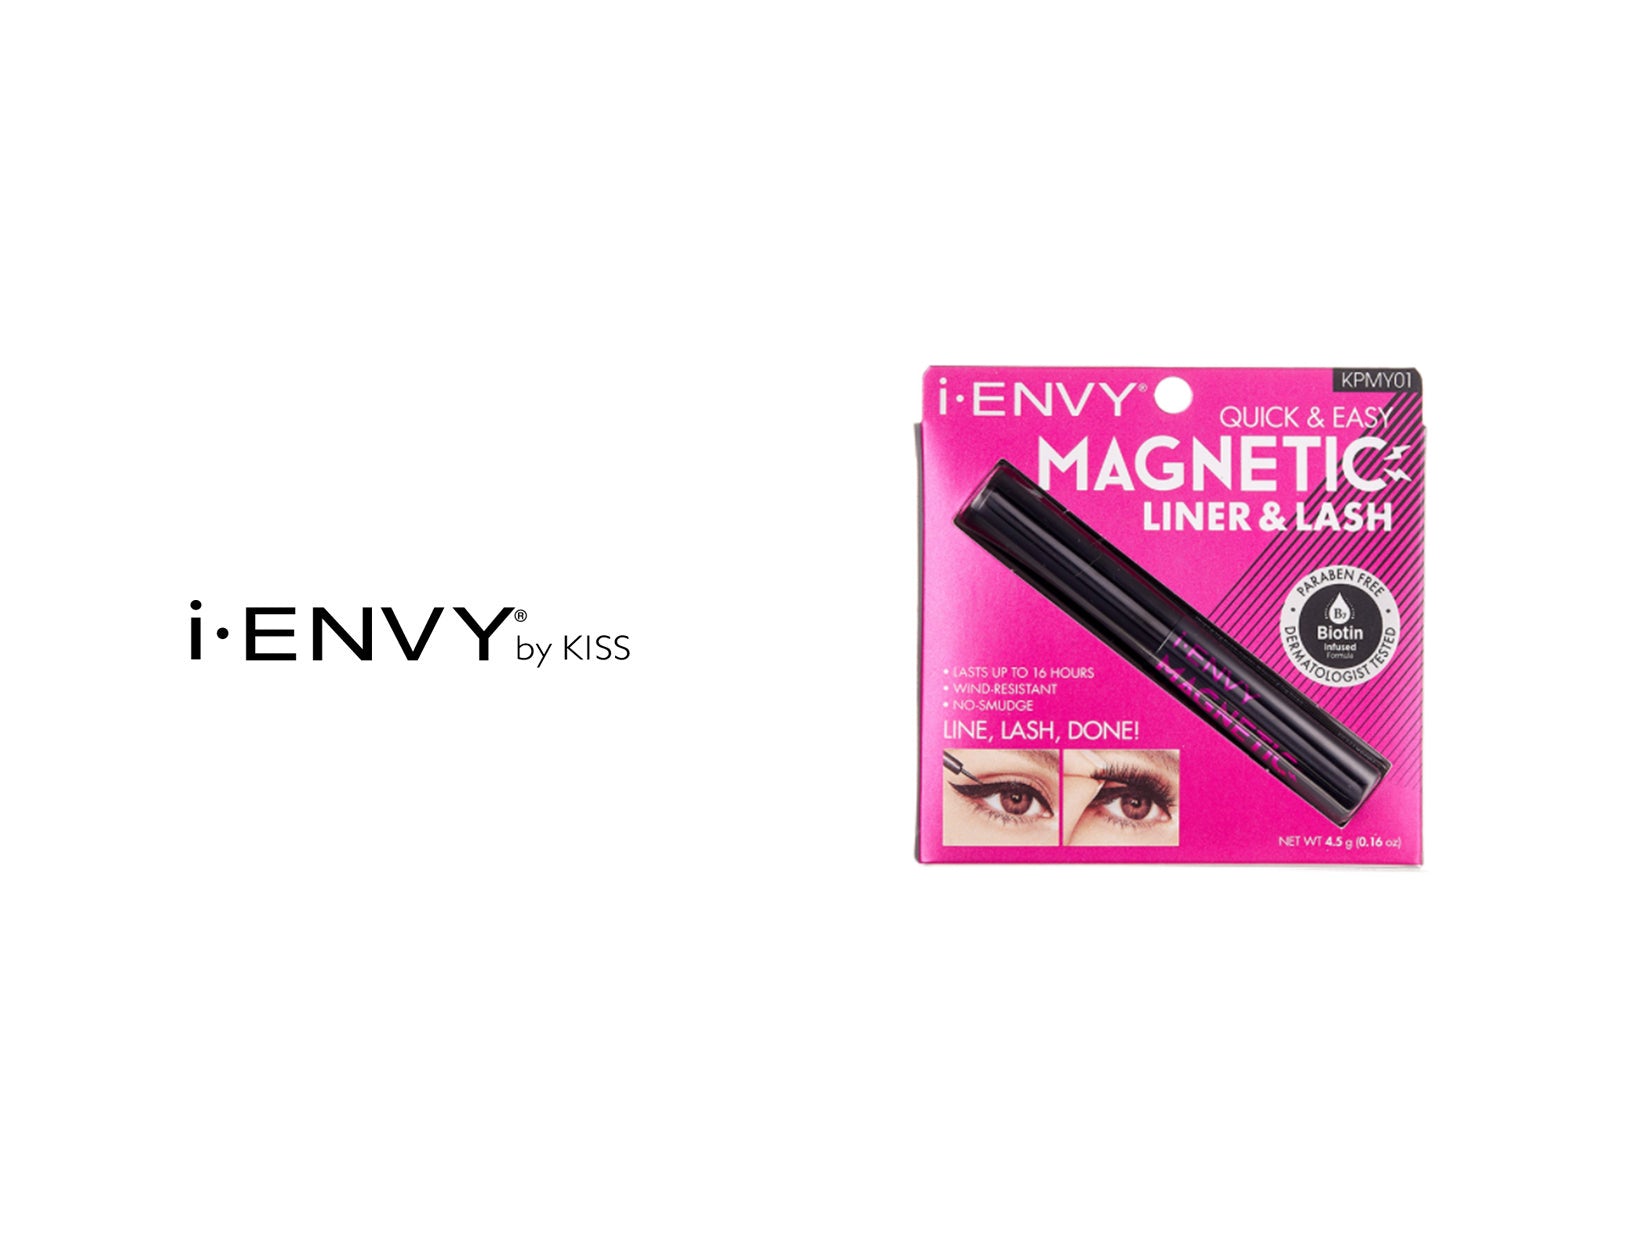 I ENVY BY KISS MAGNETIC LINER #KPMY01